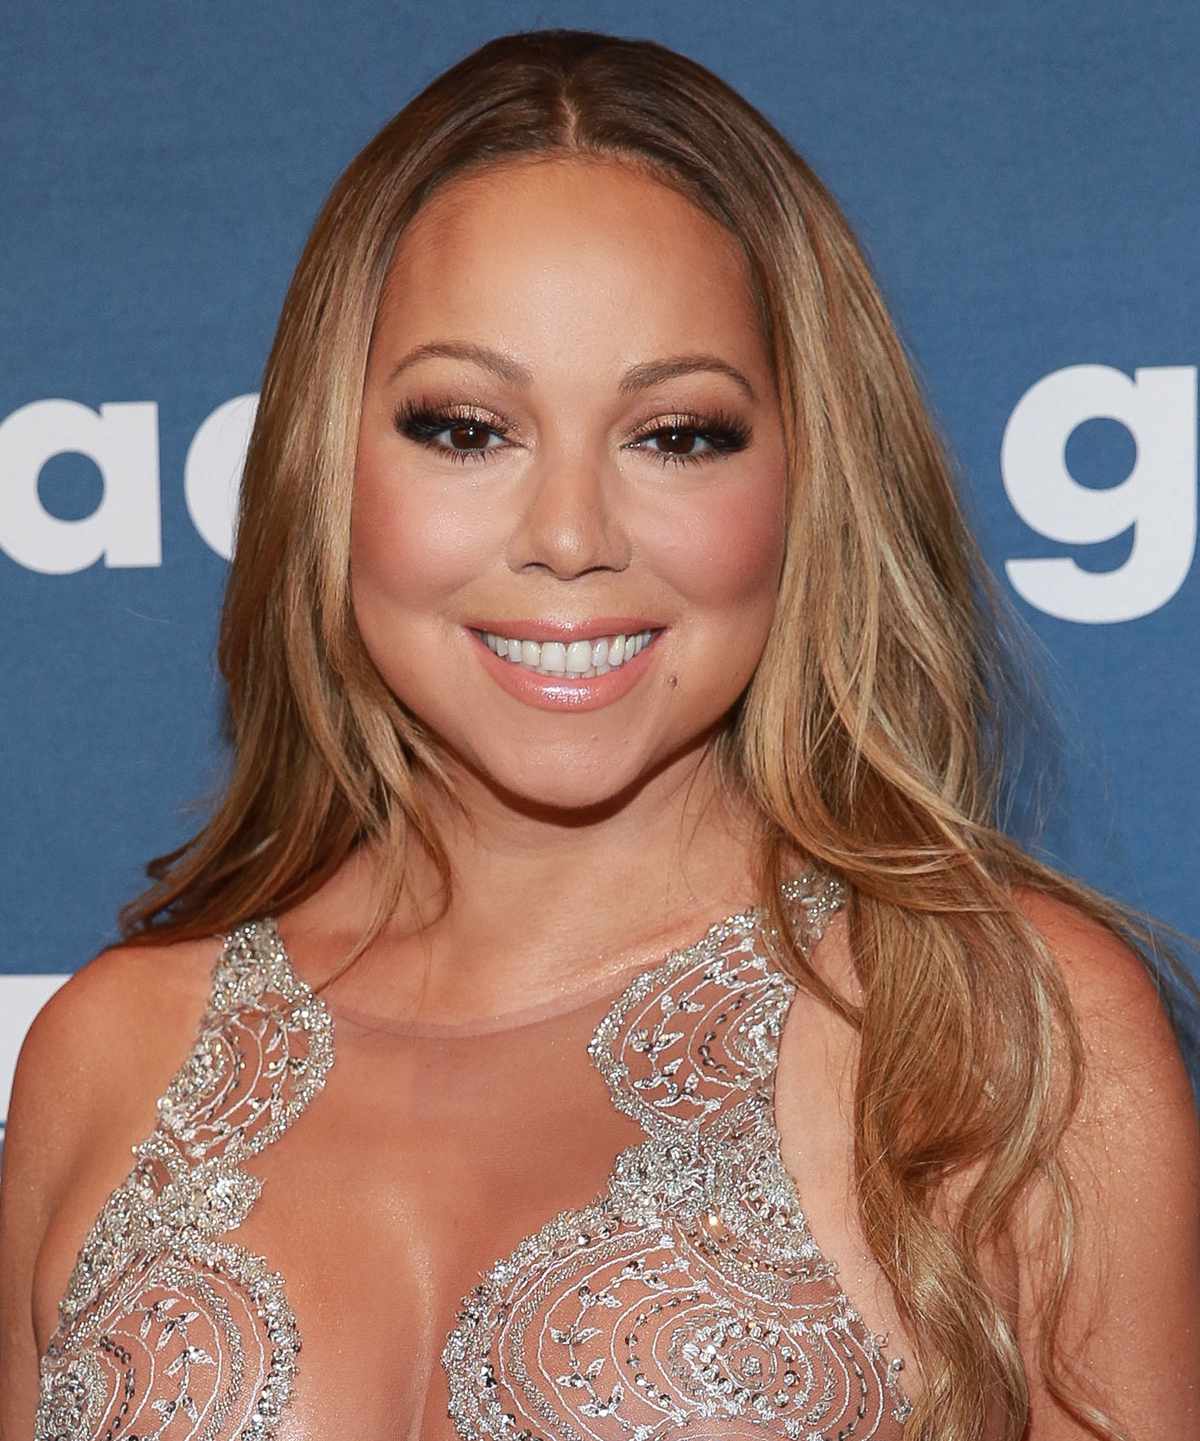 Mariah Carey arrives for the 27th Annual GLAAD Media Awards at The Waldorf=Astoria on May 14, 2016 in New York City.